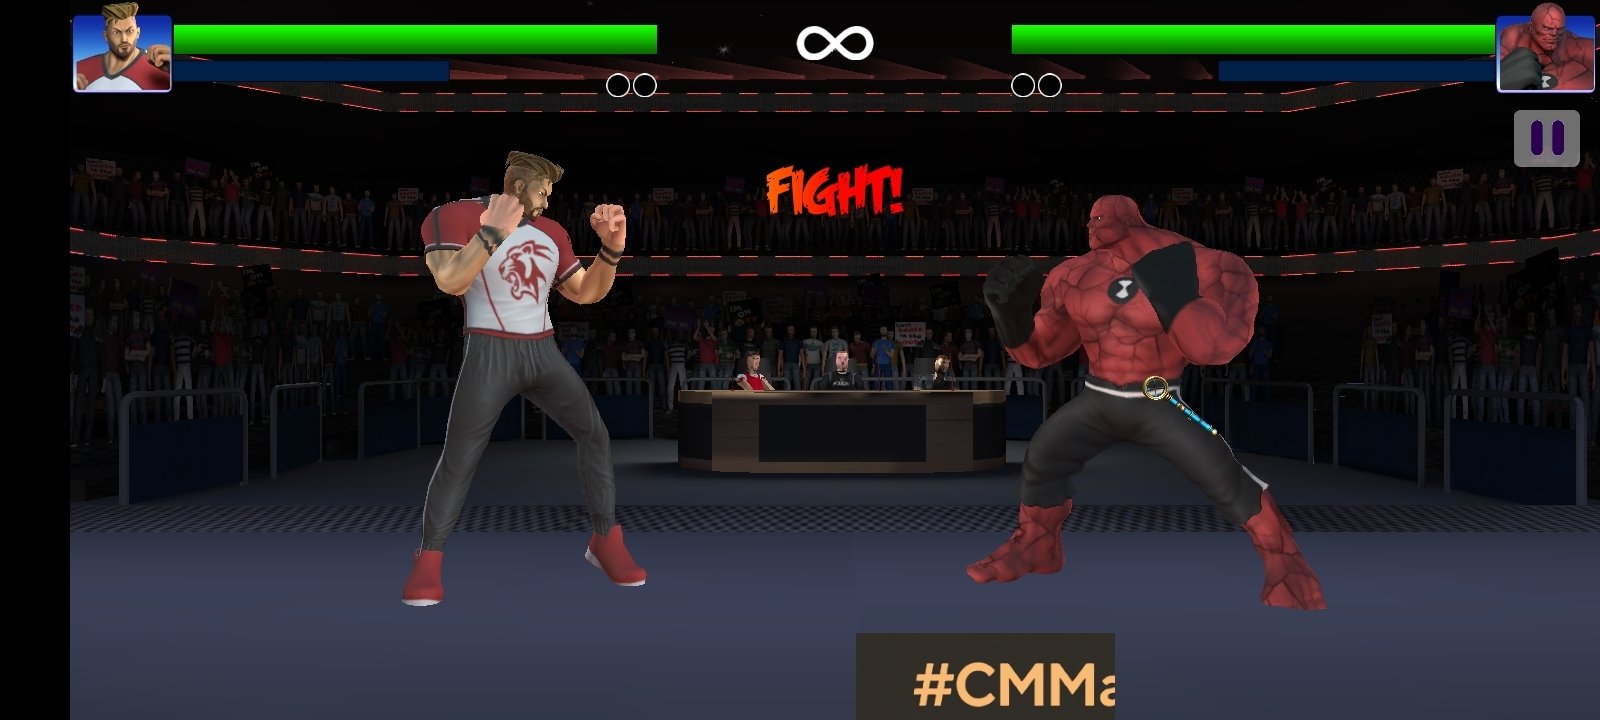 Bodybuilder GYM Fighting Game - Apps on Google Play